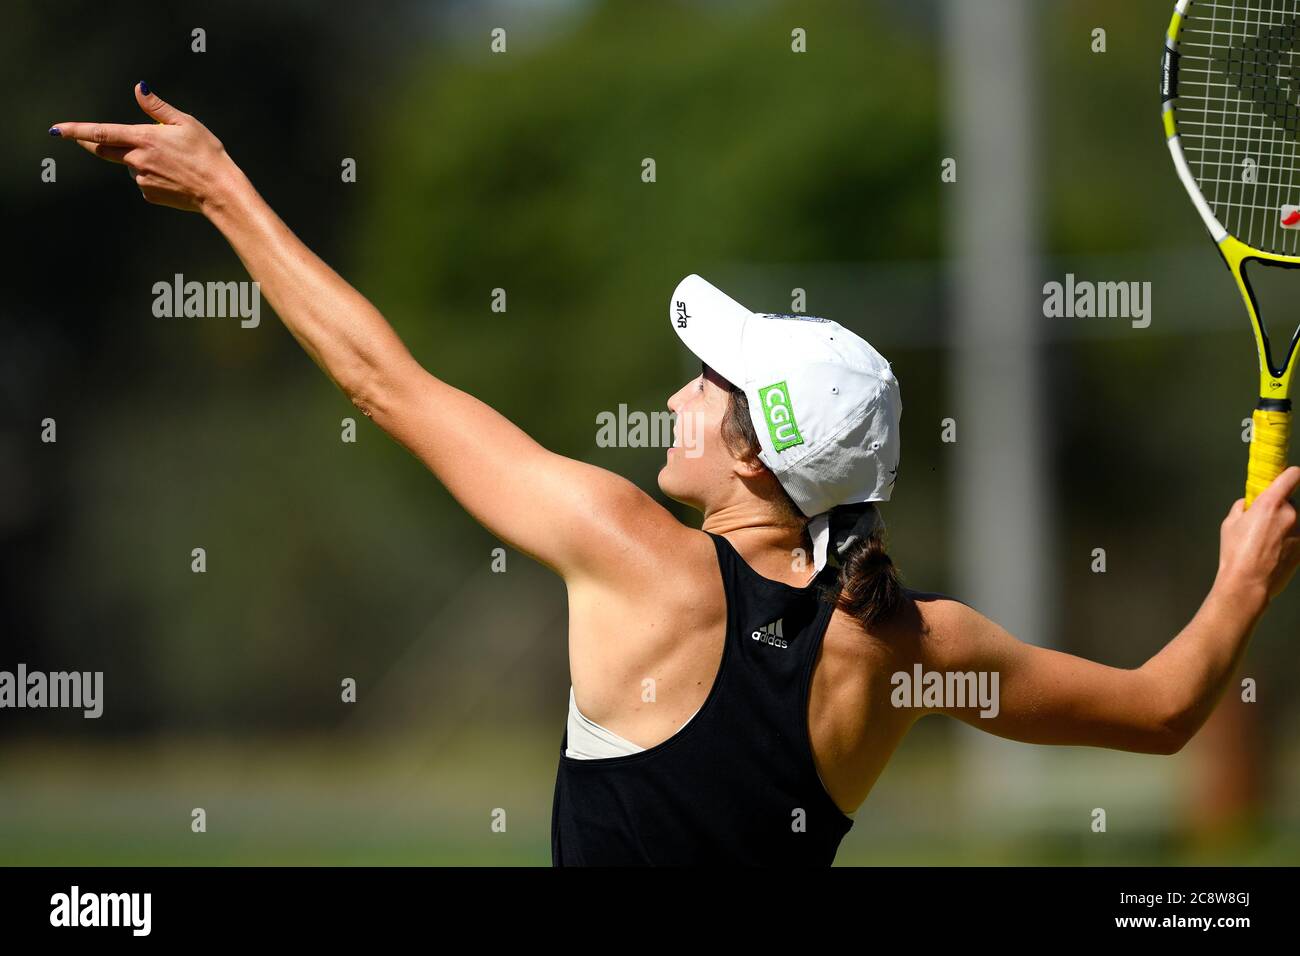 Grass roots sport. a young woman prepares to serve during a tennis match, Benalla, Victoria, Australia Stock Photo